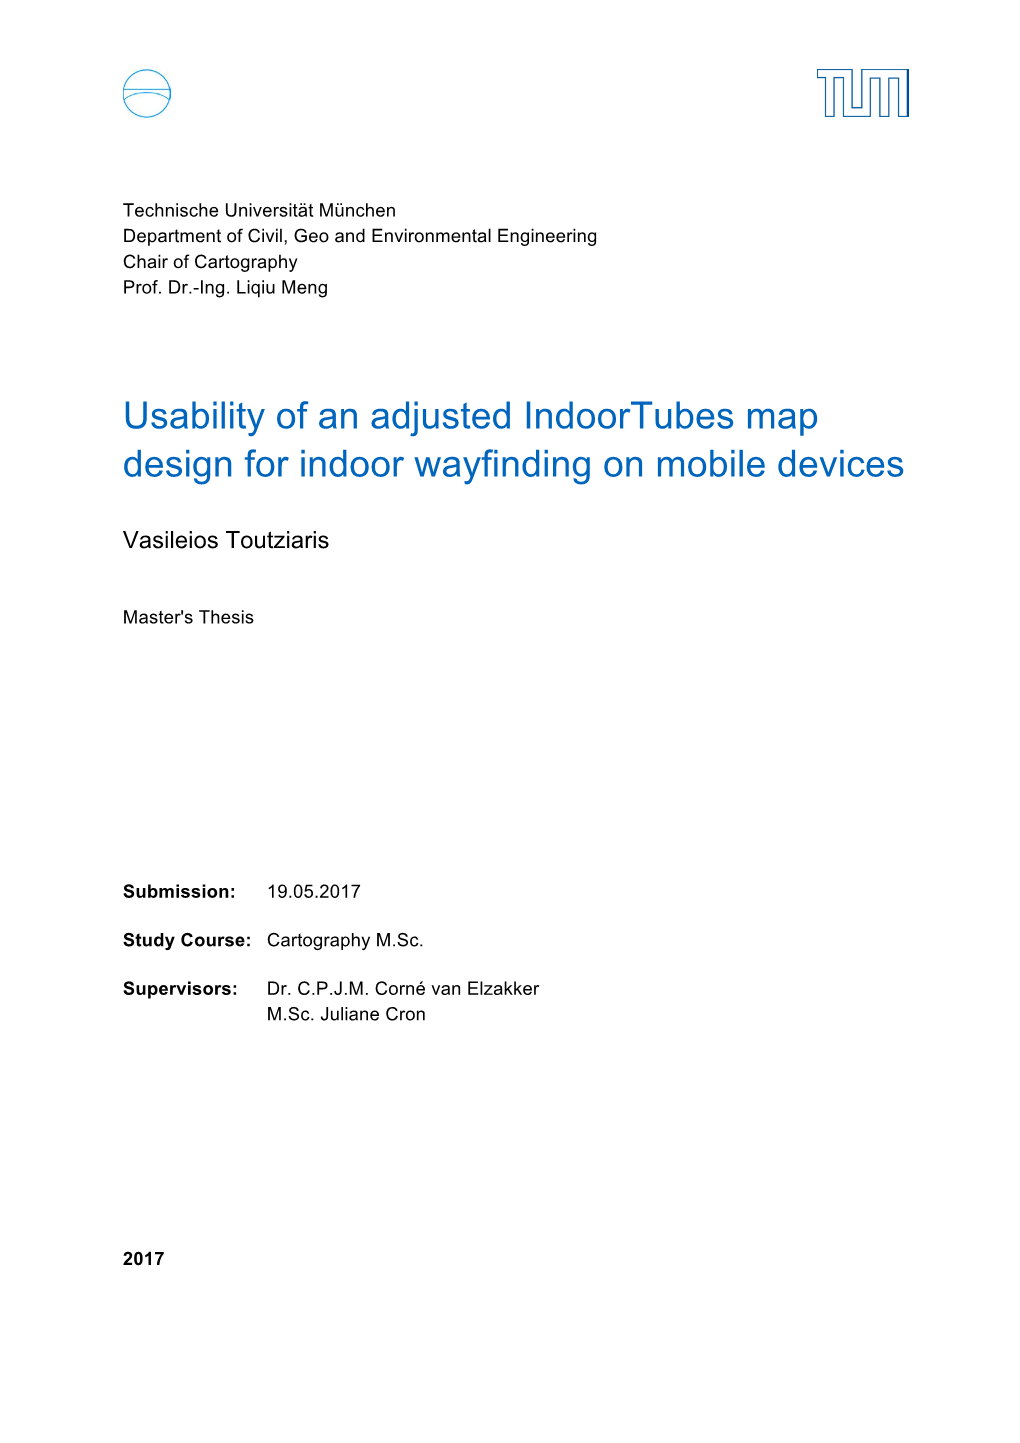 Usability of an Adjusted Indoortubes Map Design for Indoor Wayfinding on Mobile Devices